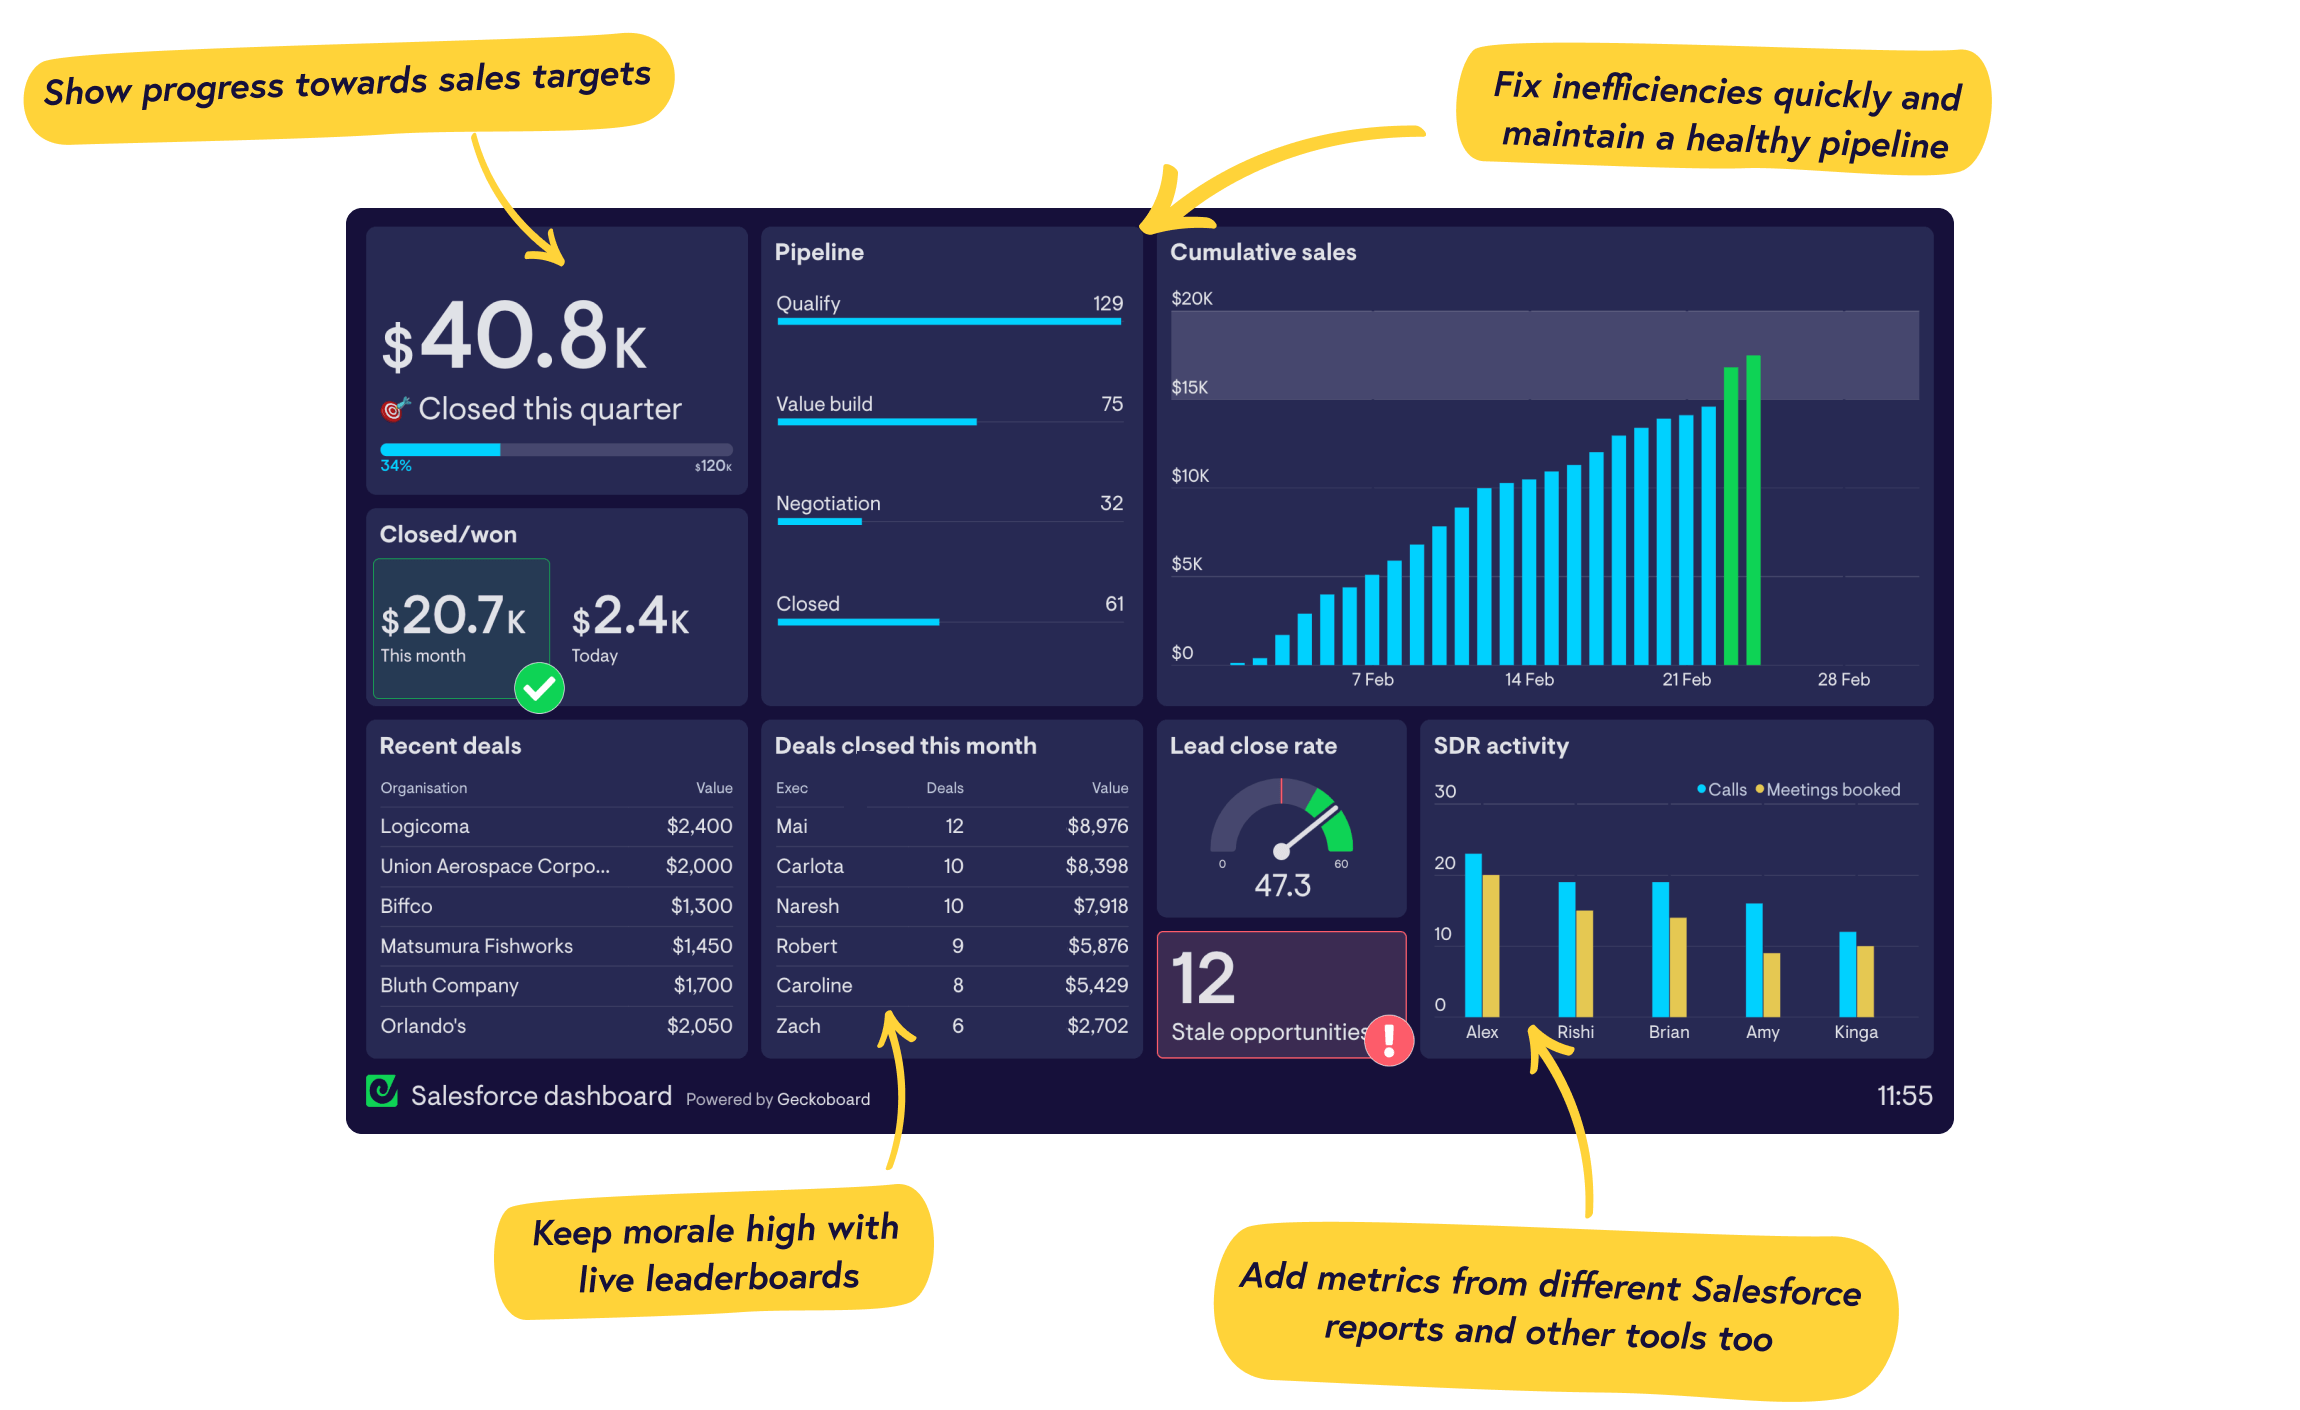 Real-time Salesforce dashboards from Geckoboard